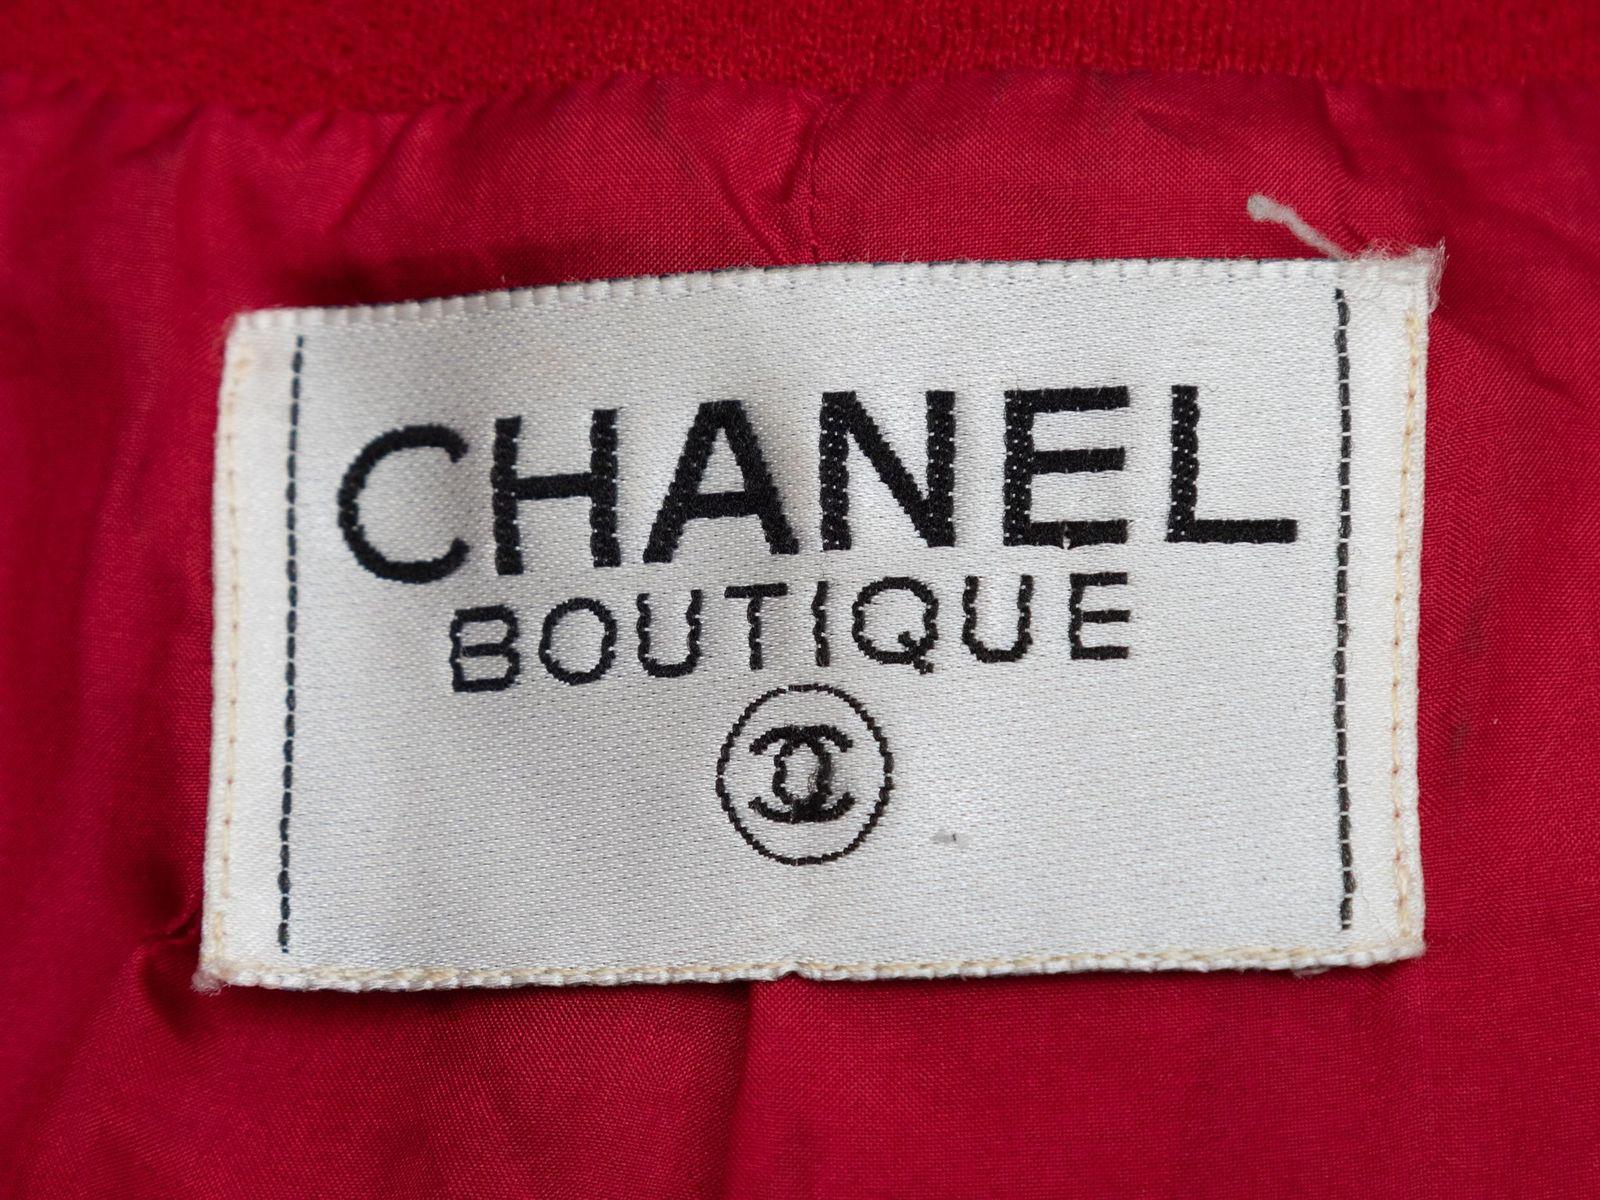 Product Details: Vintage red wool jacket by Chanel Boutique. V-neck. Four pockets. Gold-tone button closures at center front. 44